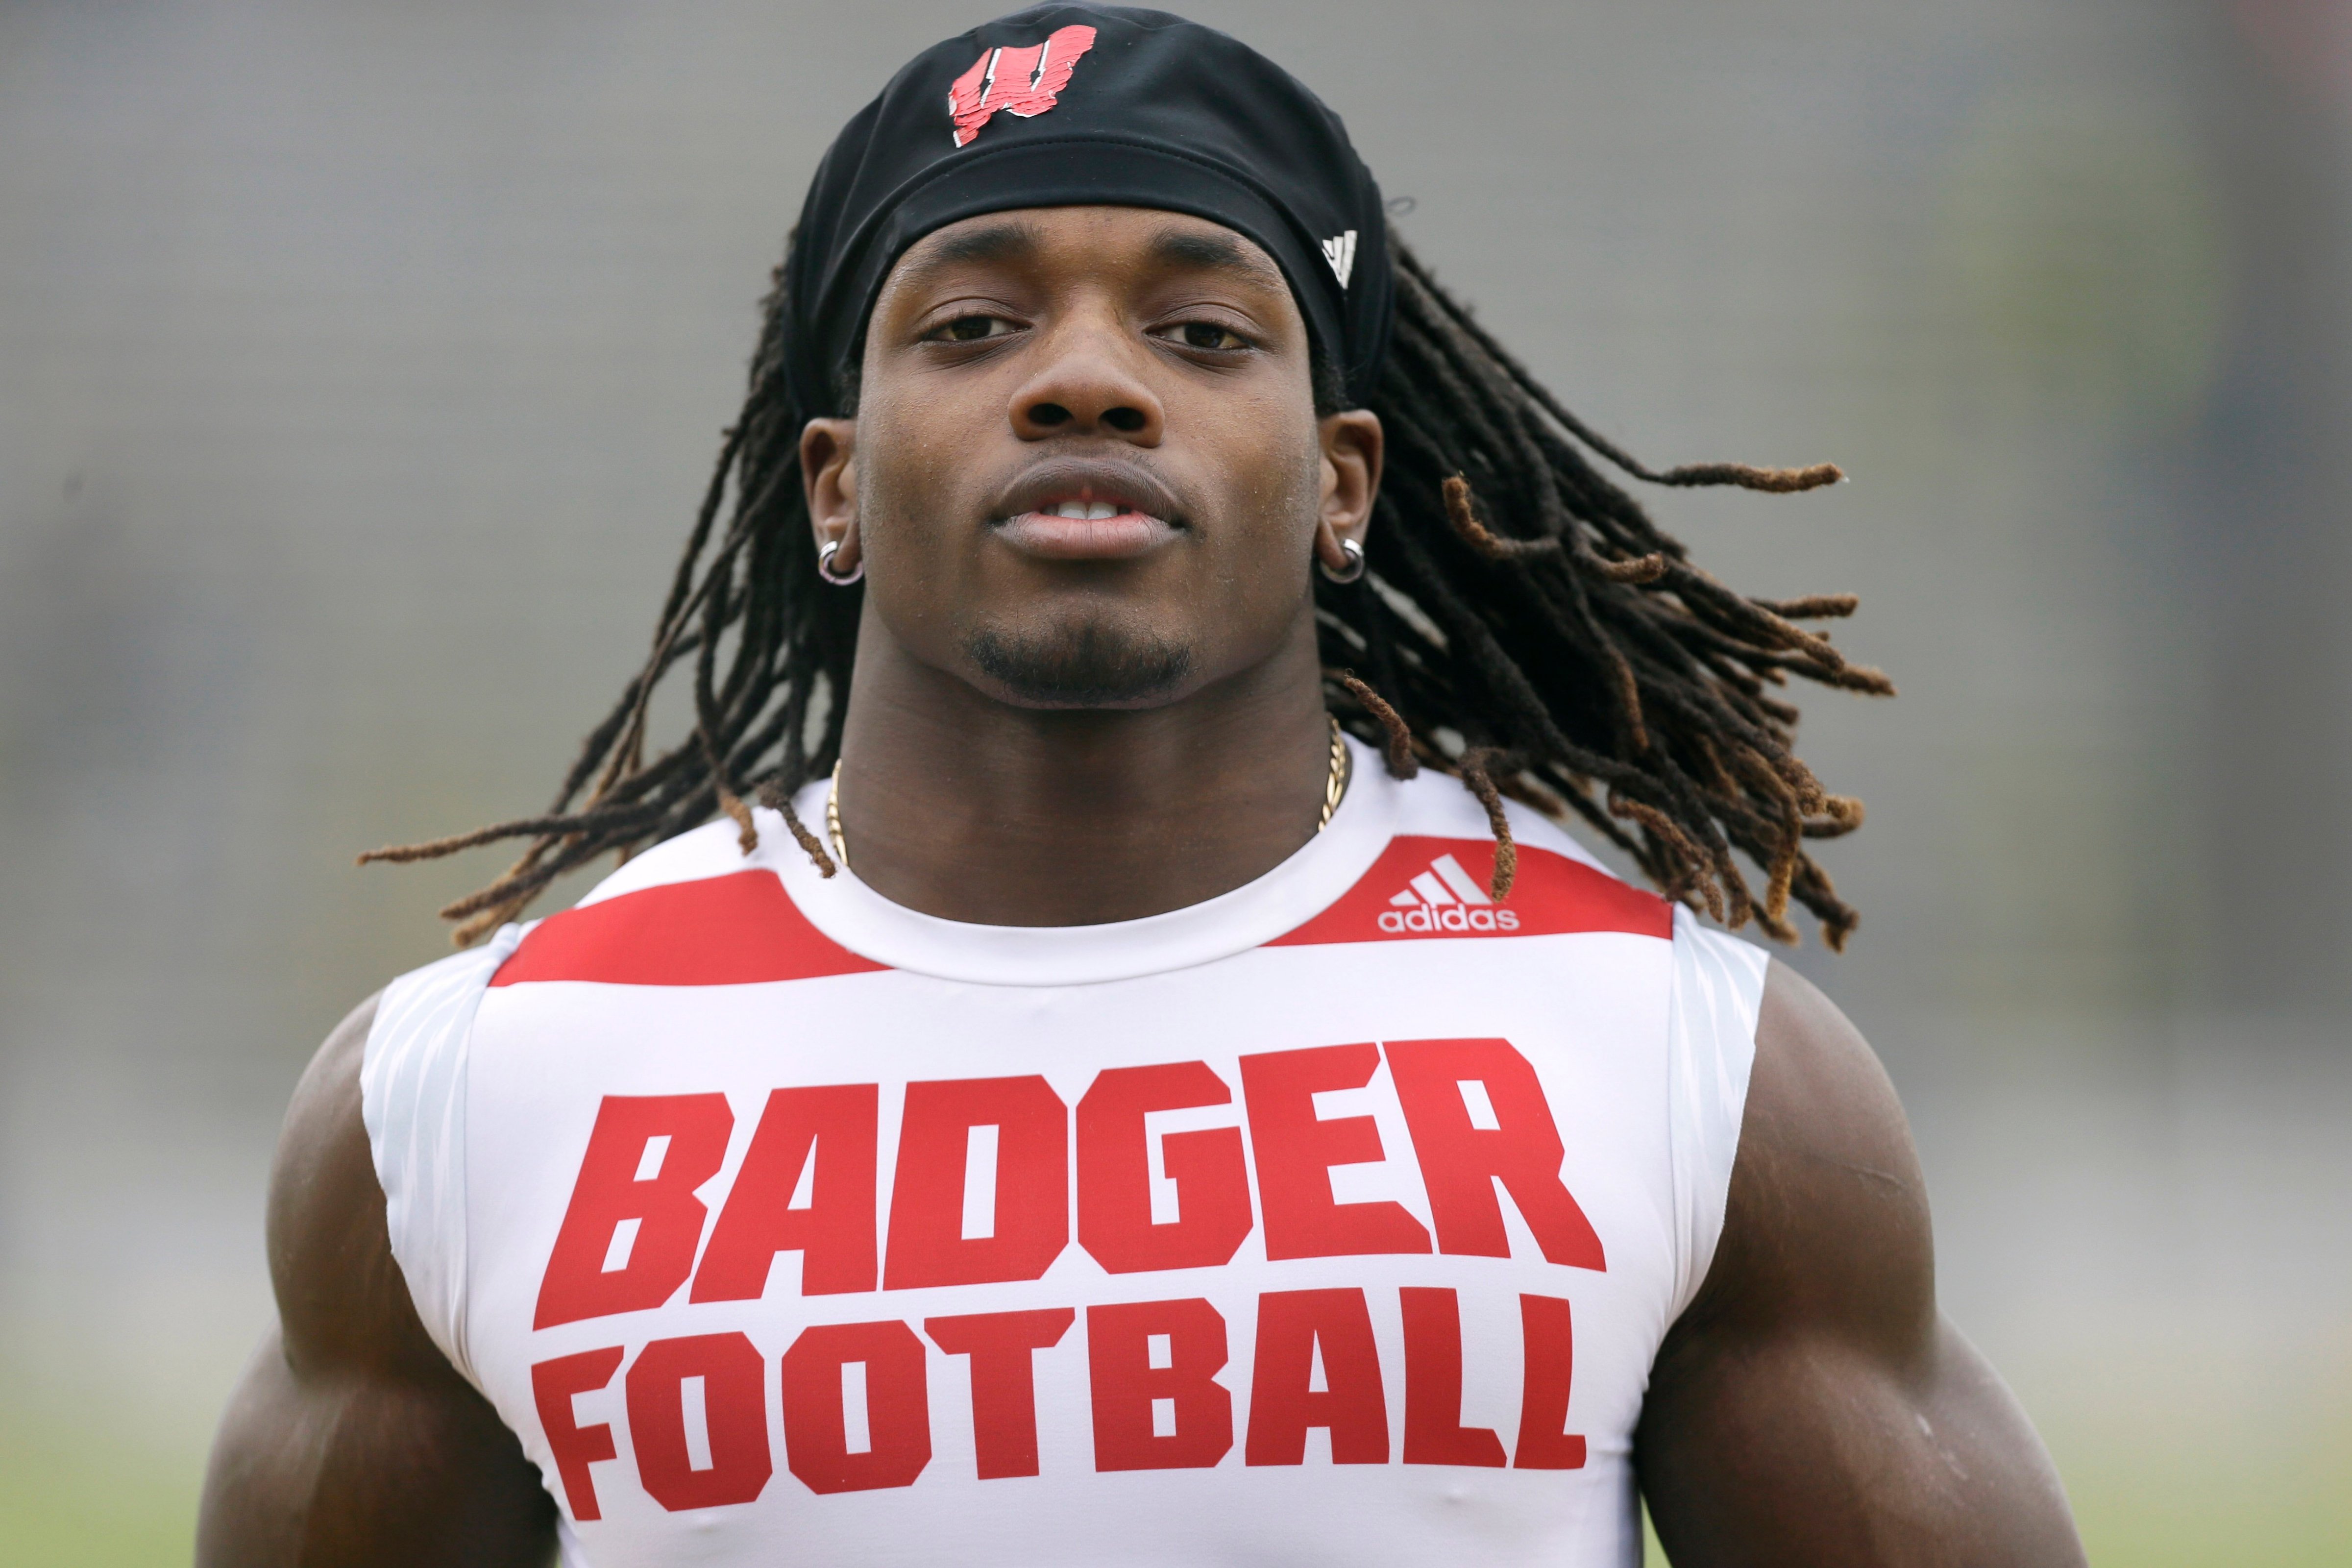 Wisconsin running back Melvin Gordon warming up on the field before an NCAA college football game against Iowa in Iowa City, Iowa.